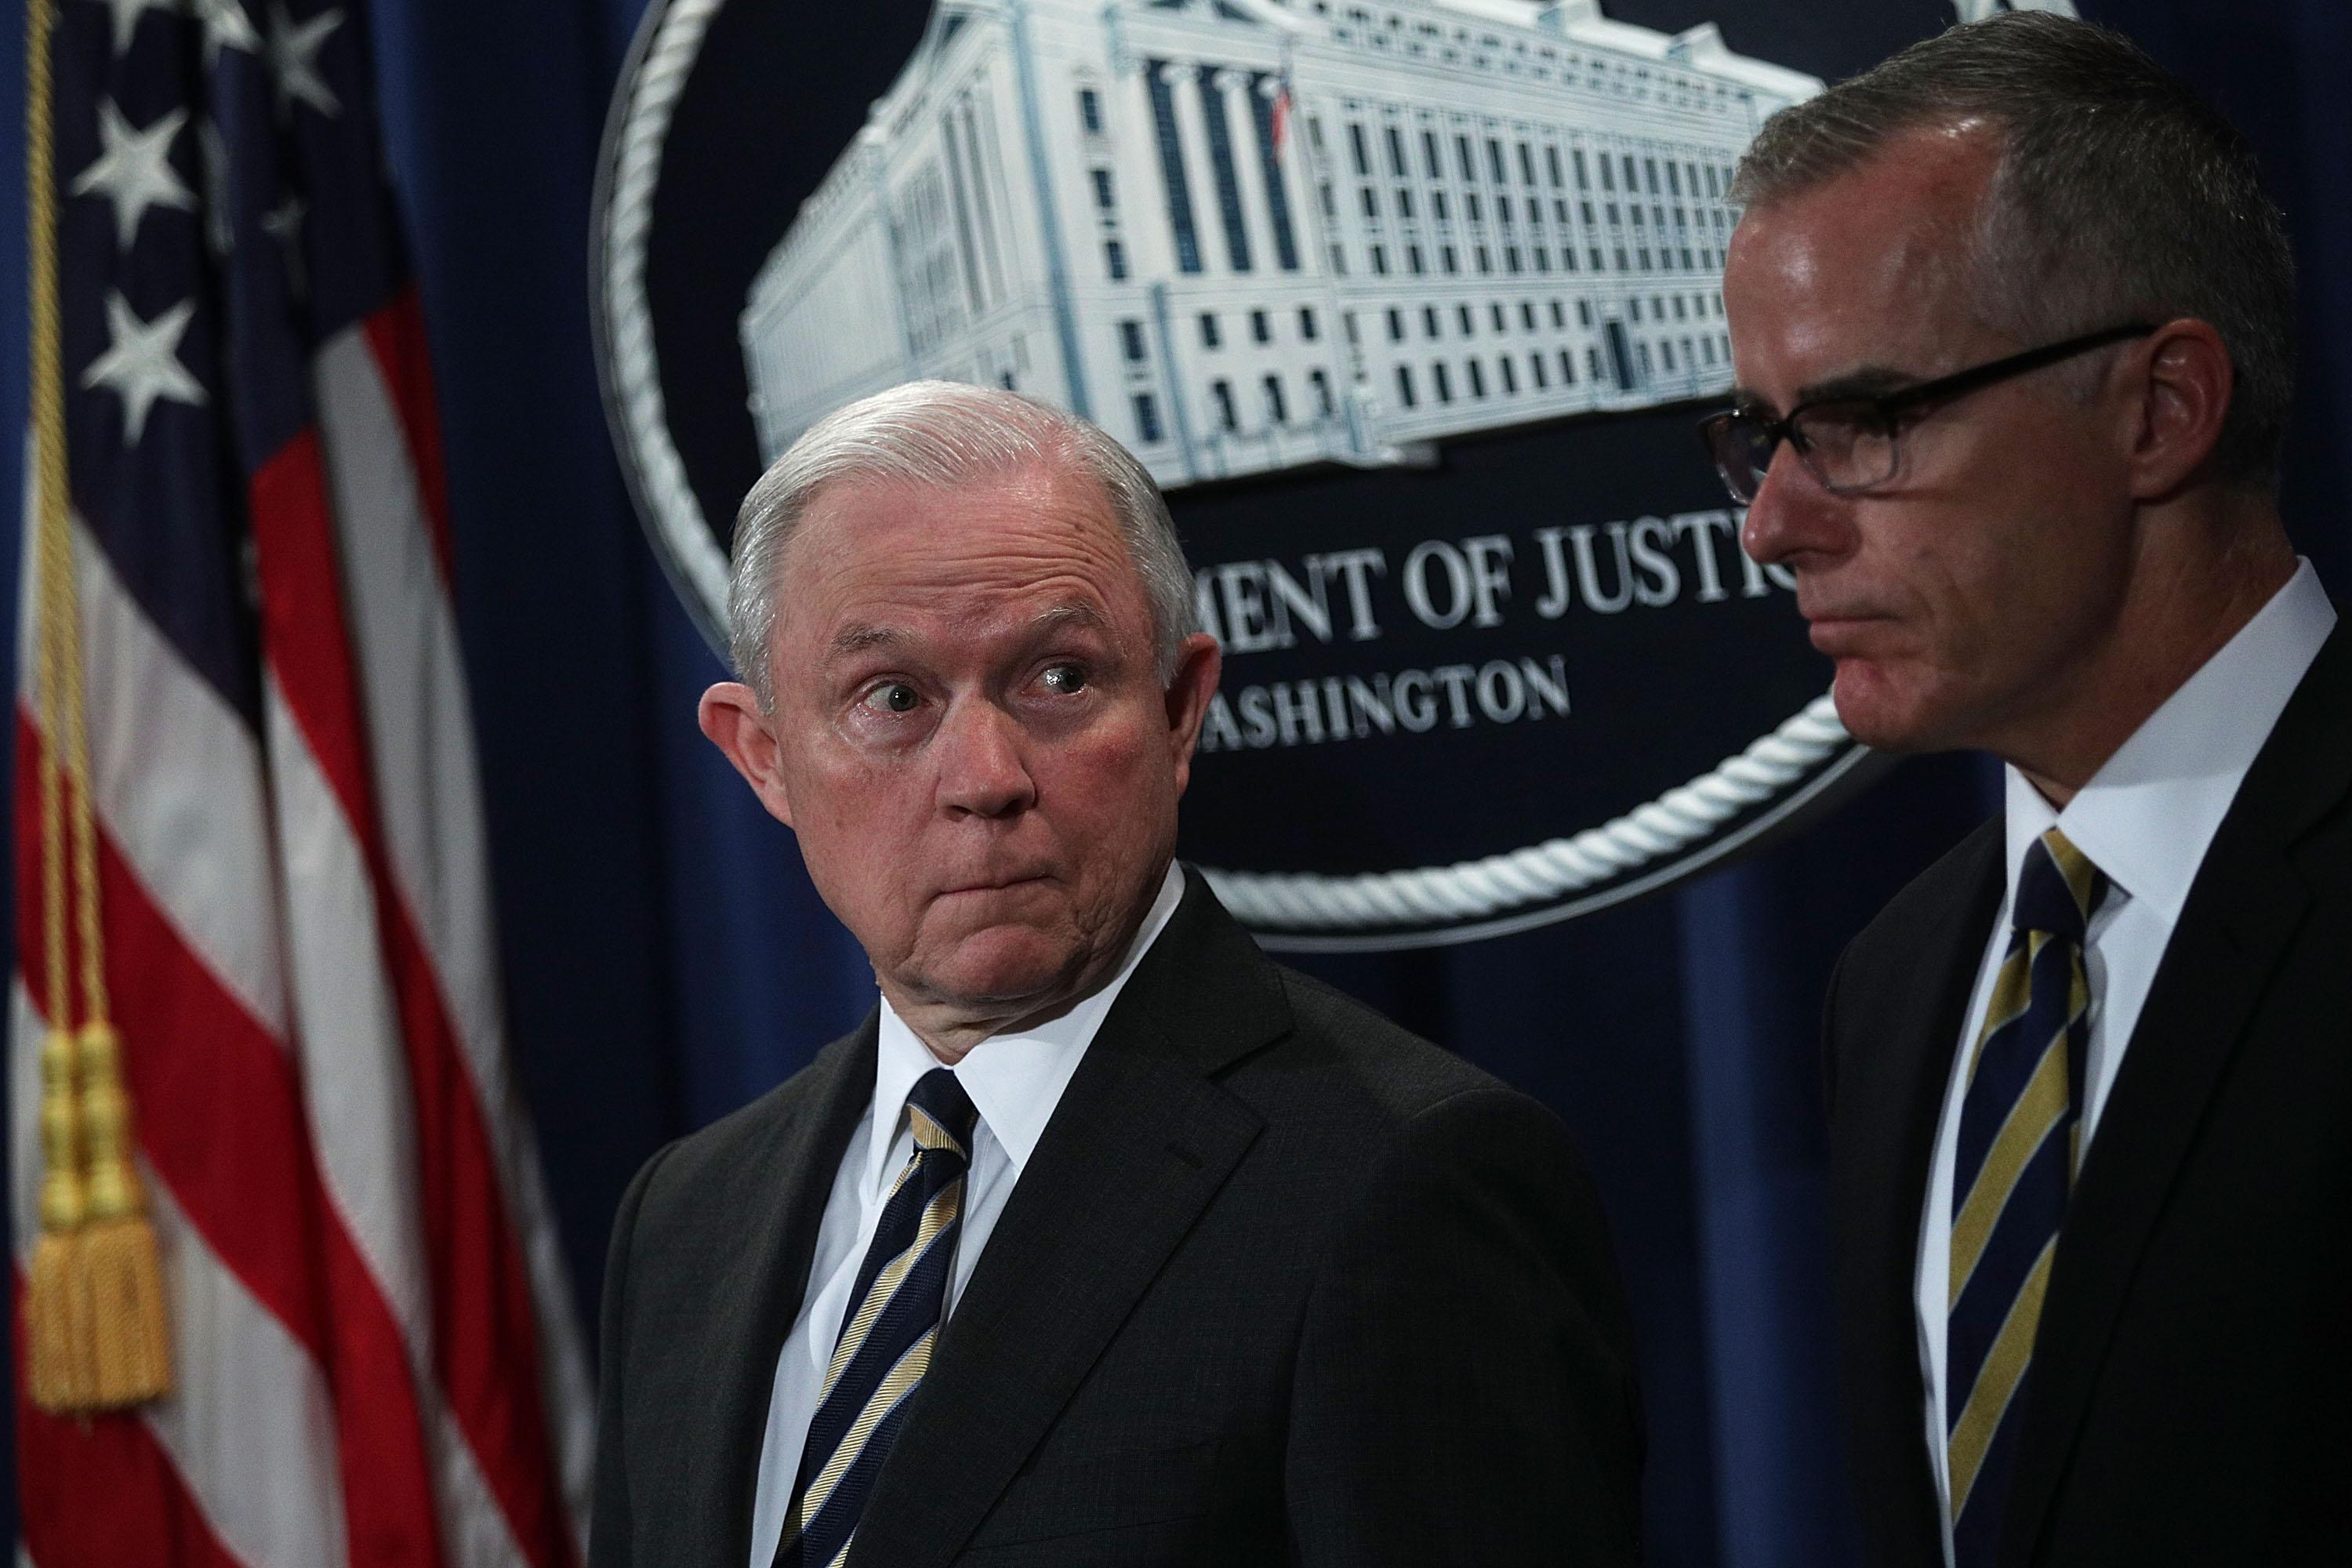 WASHINGTON, DC - JULY 13:  U.S. Attorney General Jeff Sessions (L) and Acting FBI Director Andrew McCabe (R) during a news conference to announce significant law enforcement actions July 13, 2017 at the Justice Department in Washington, DC. Attorney General Jeff Sessions held the news conference to announce the 2017 health care fraud takedown.  (Photo by Alex Wong/Getty Images)